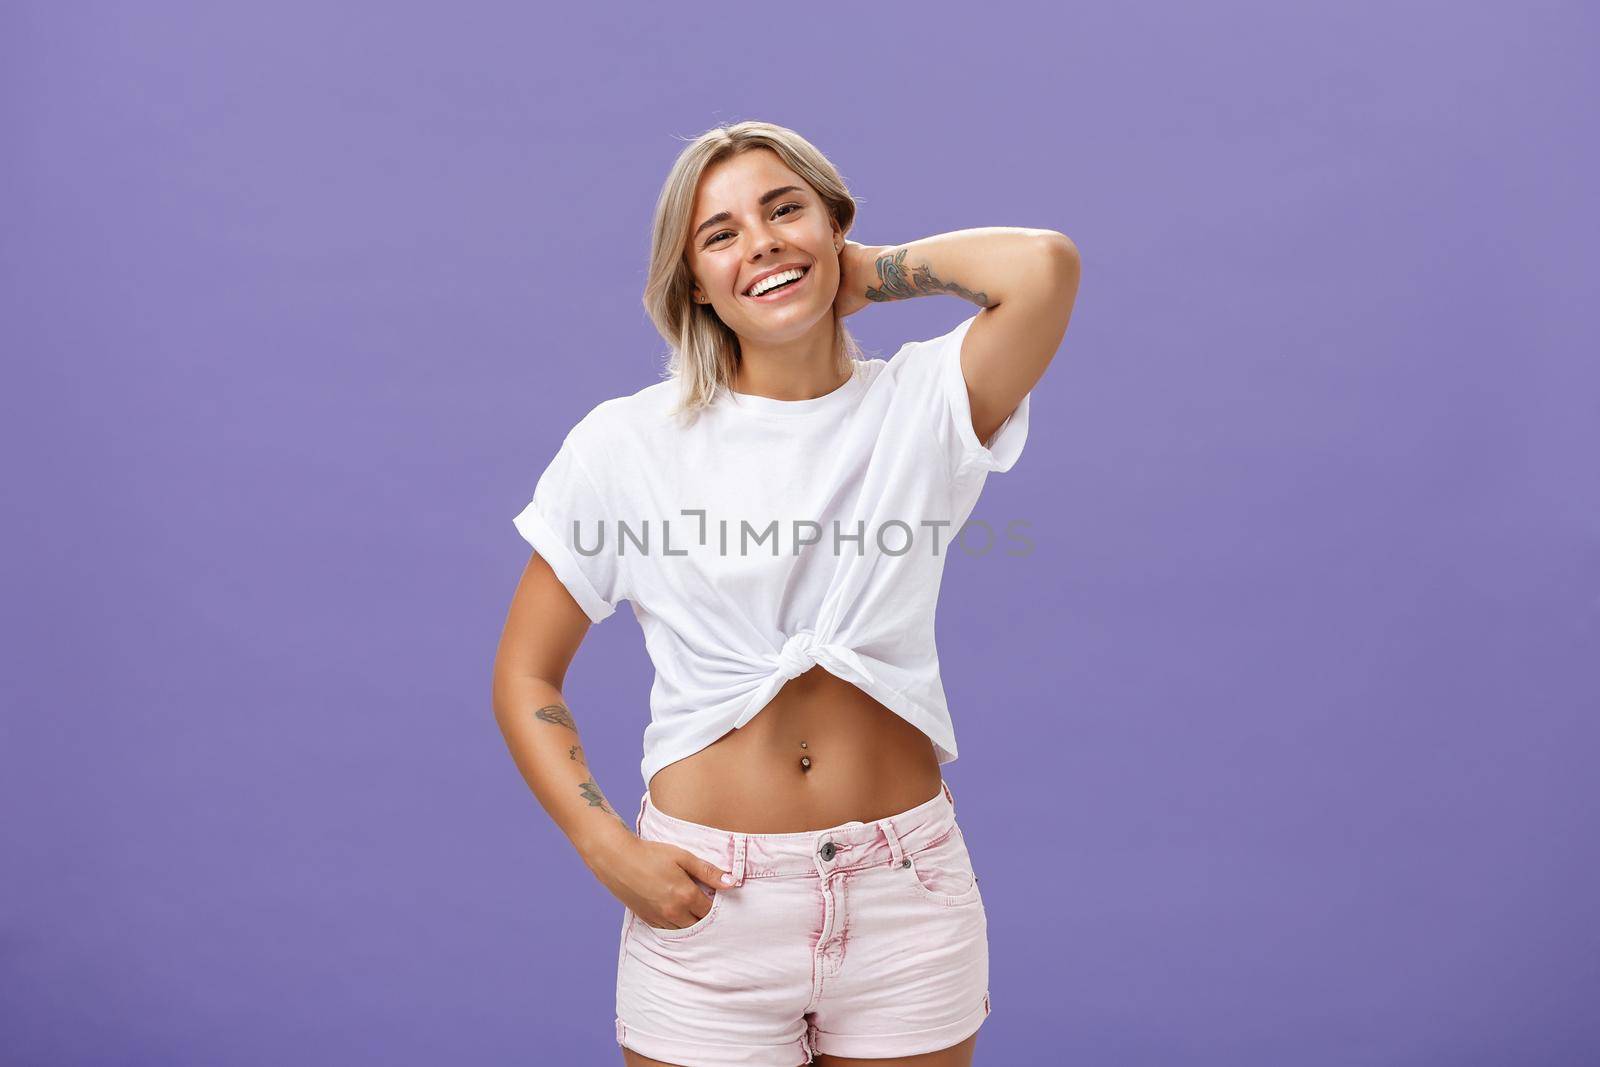 Lifestyle. Indoor shot of carefree relaxed and joyful attractive athletic blonde woman in trendy summer outfit touching back of neck and smiling joyfully as if being in awkward situation over purple wall.